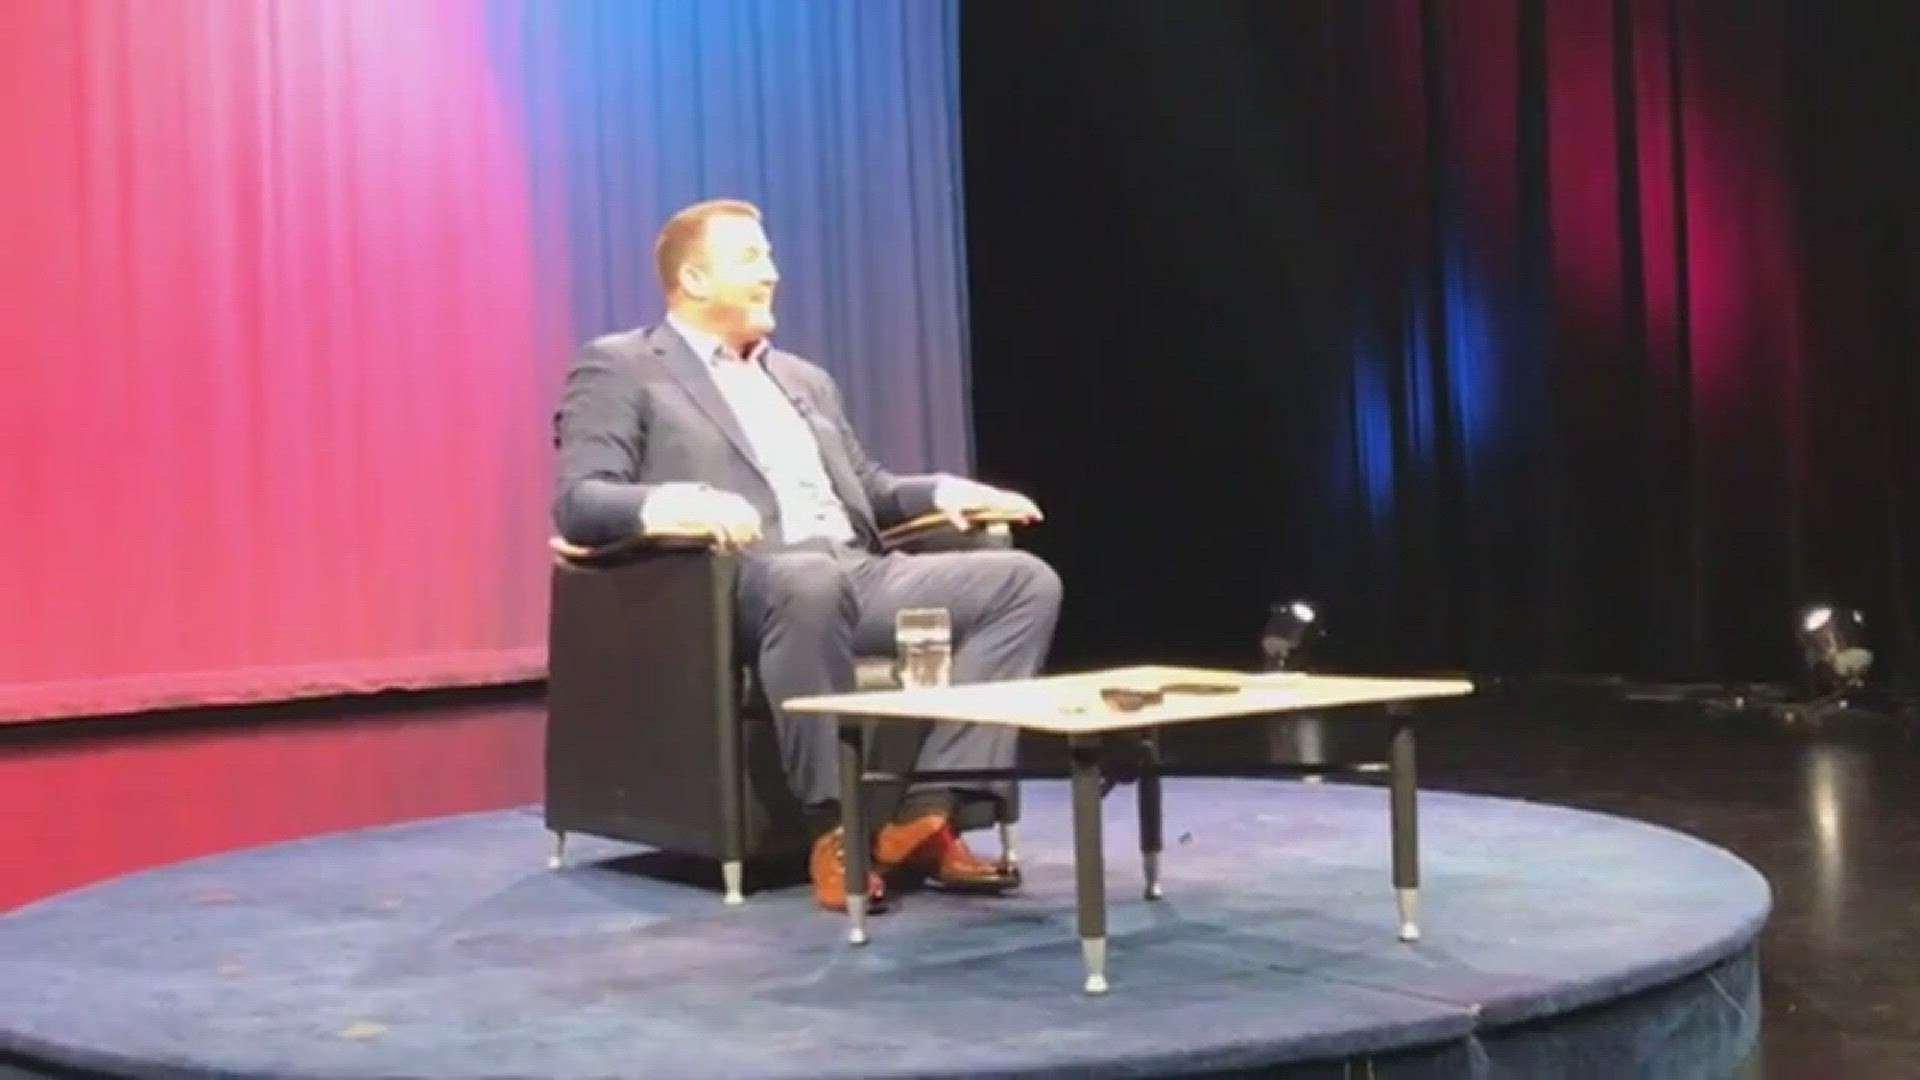 Cleveland Indians great Jim Thome talked about his selection to the National Baseball Hall of Fame after a conversation with Tom Hamilton for a television special.